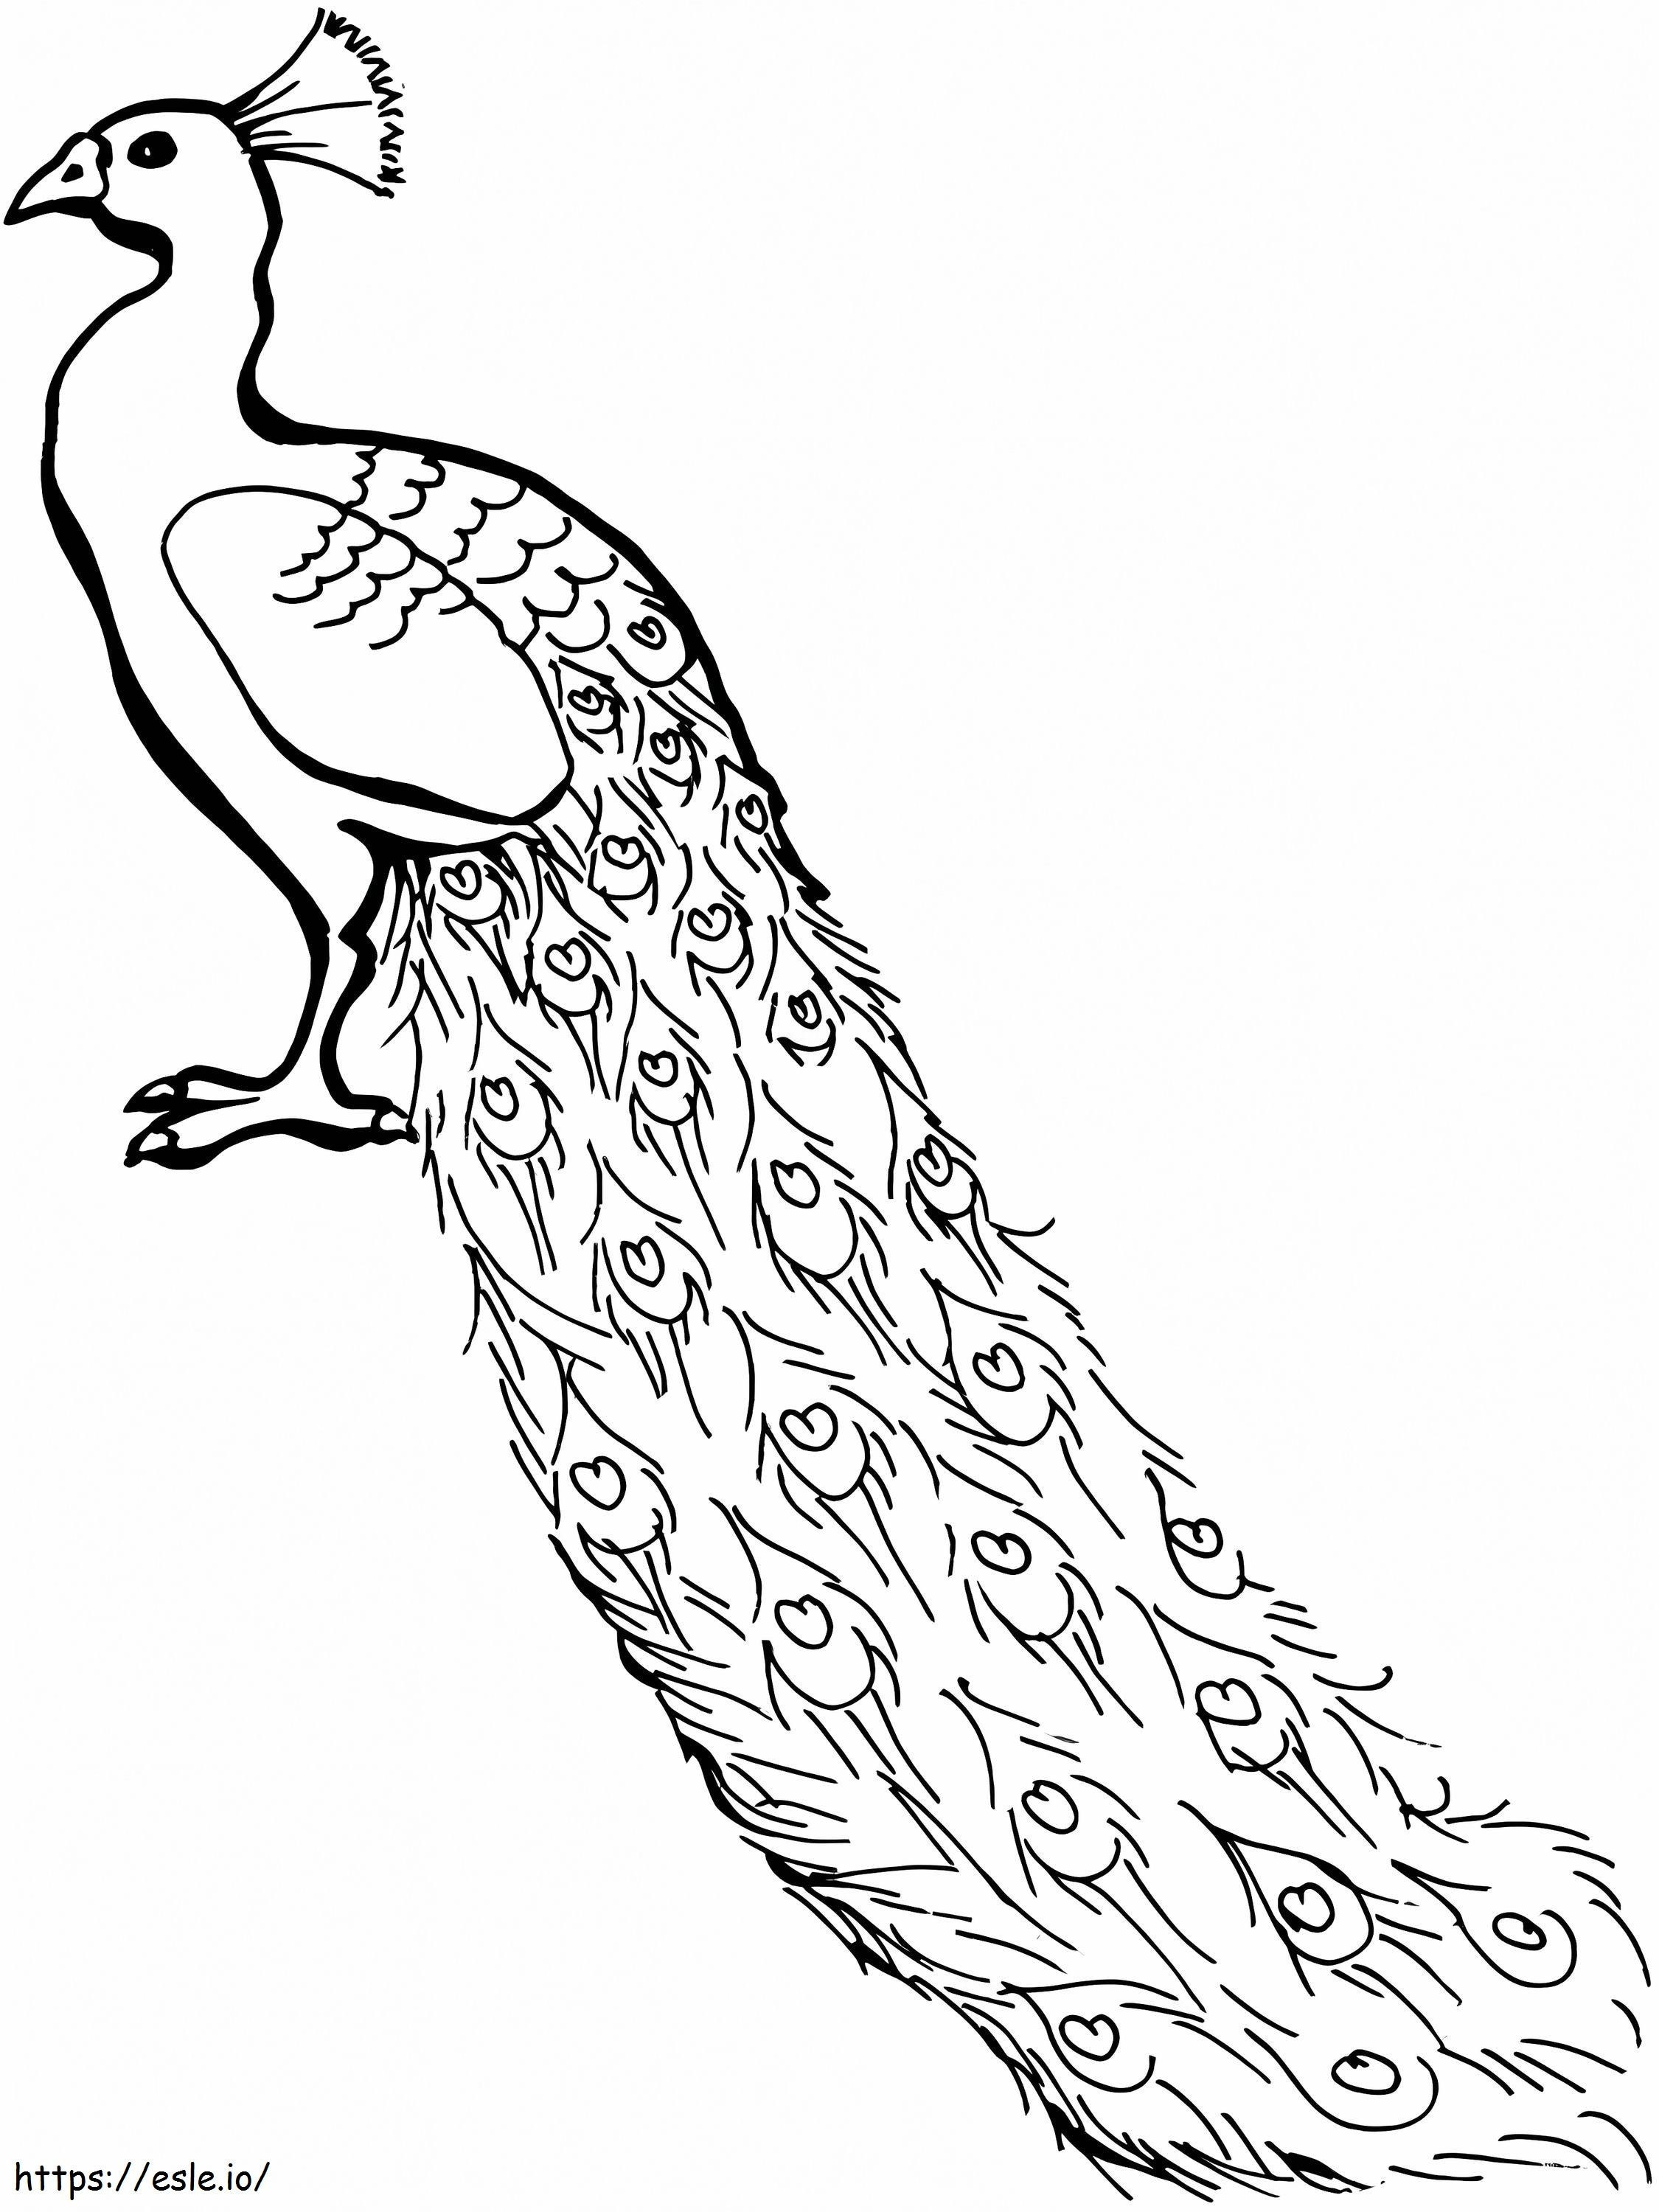 Lovely Peacock coloring page